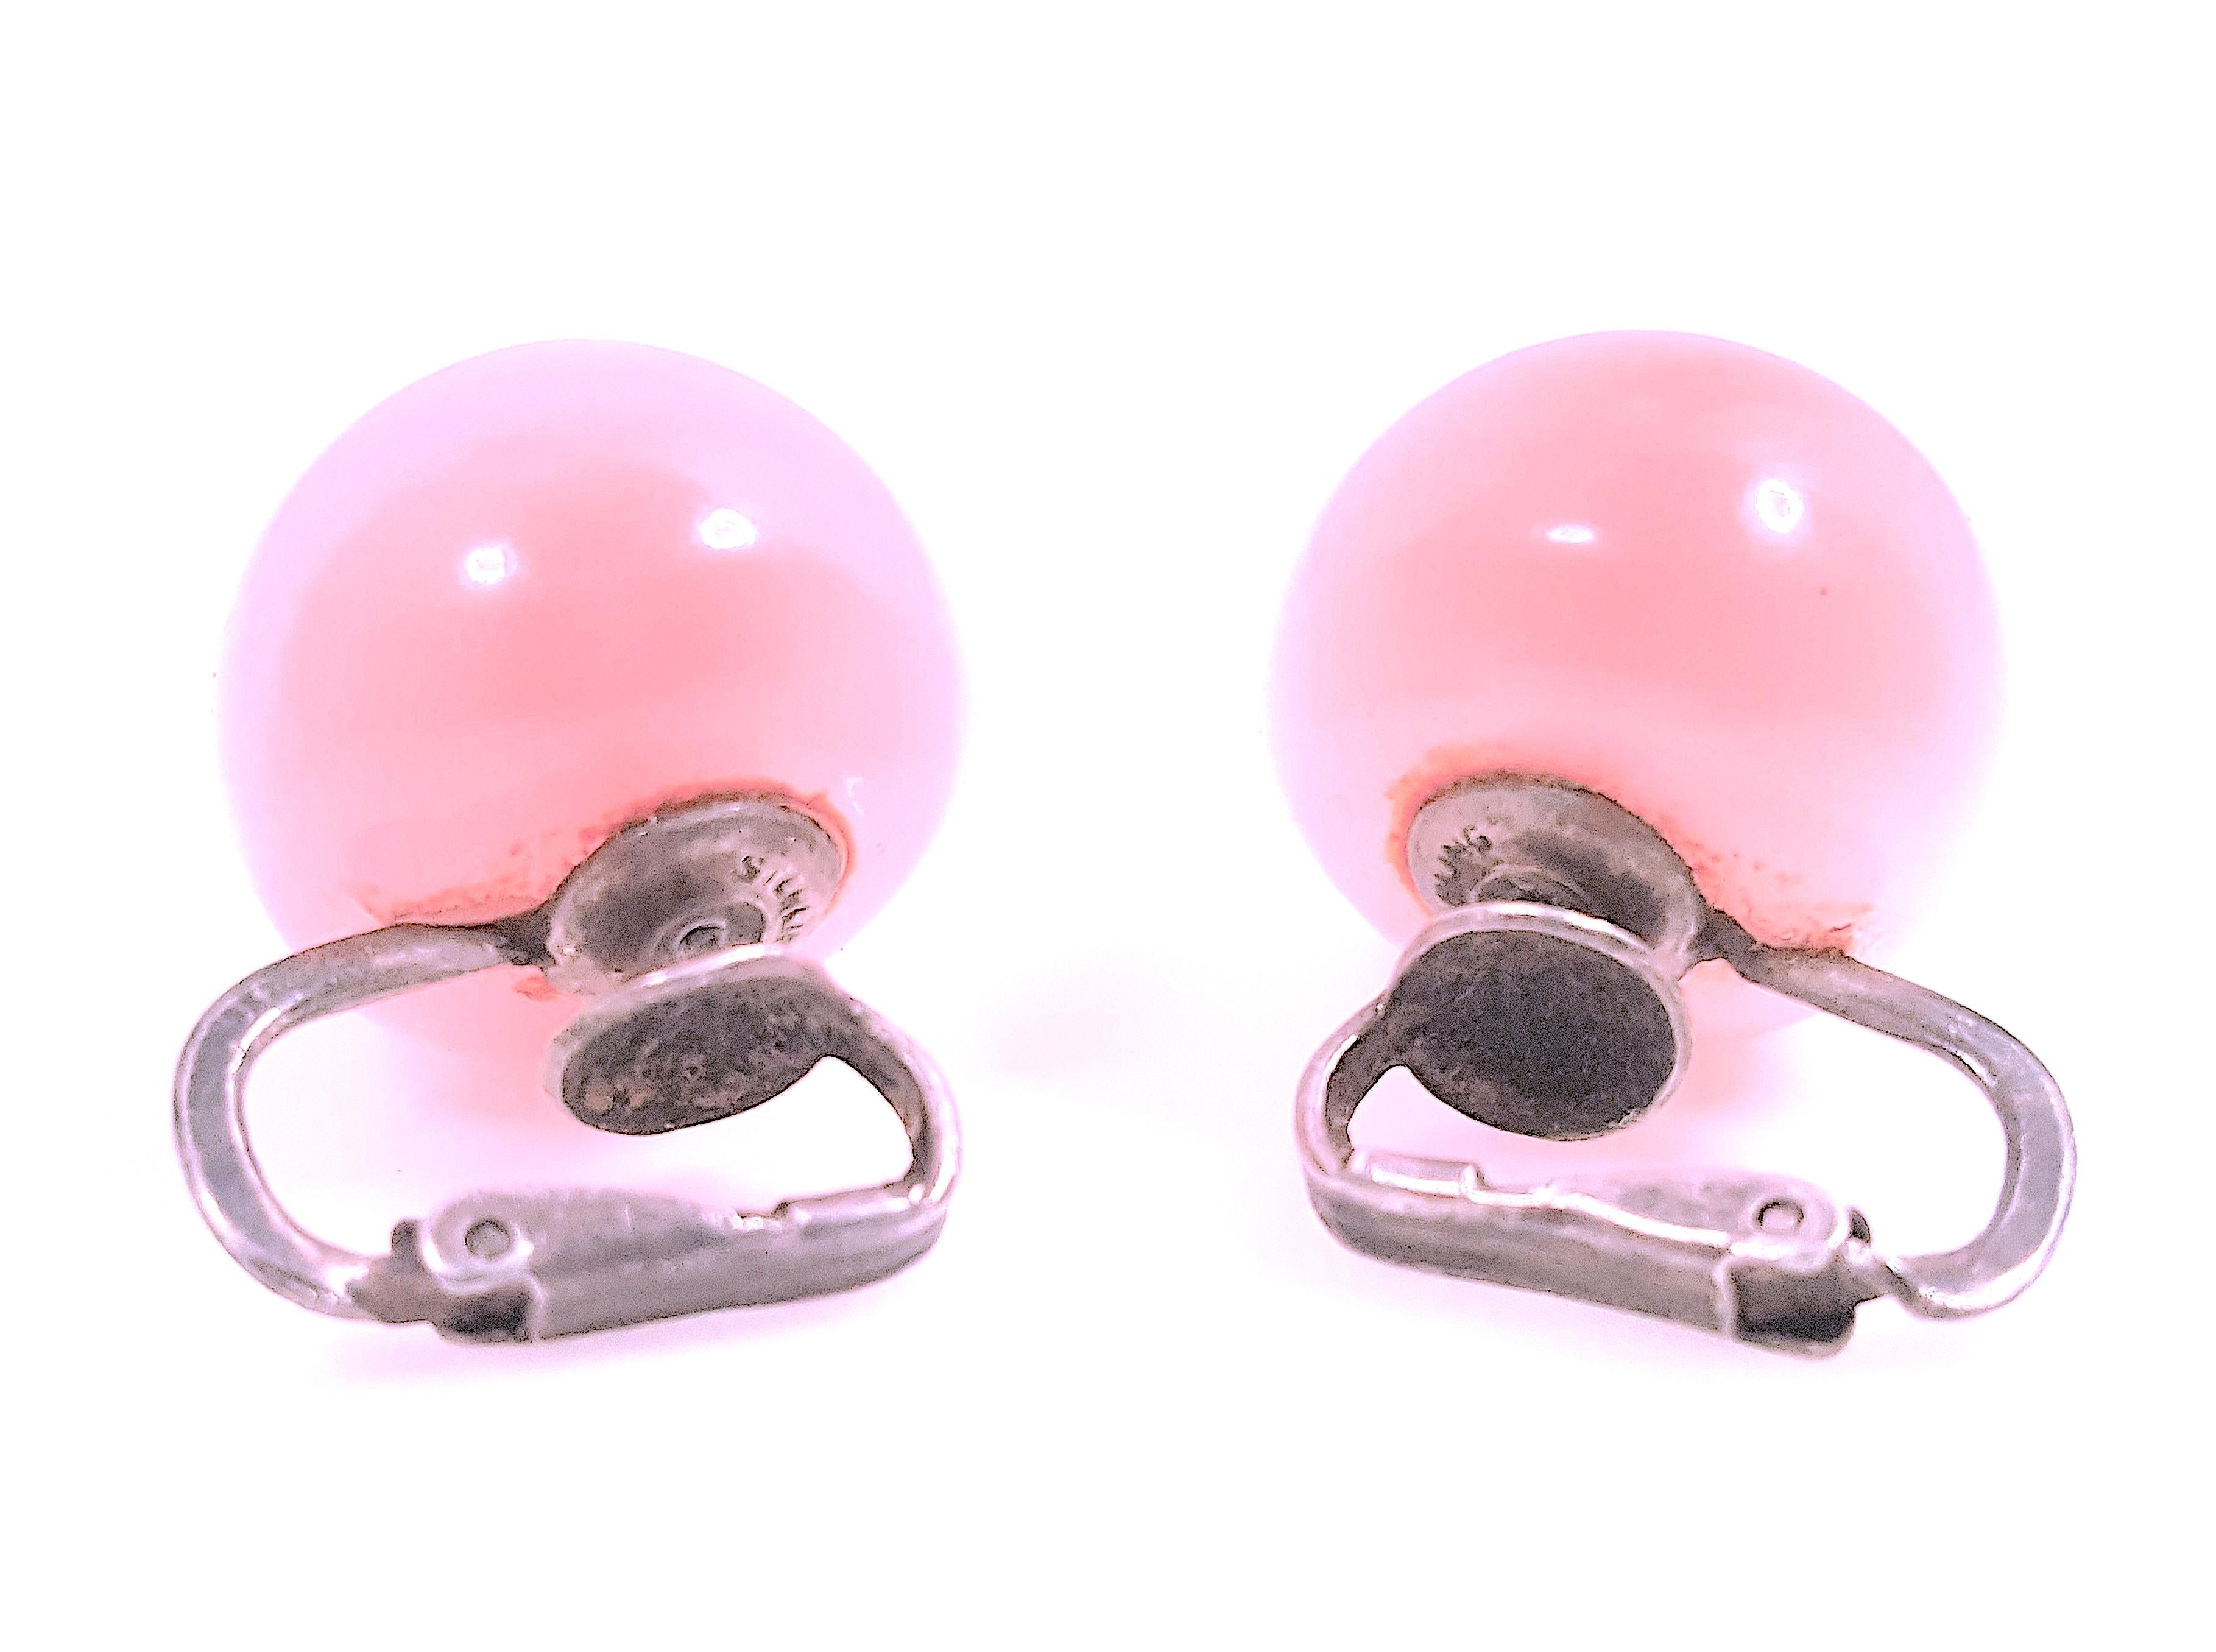 Rare wide cat's-eye, translucent, blue-tone strong pink, near spherical, 14mm moonstones with misty lavender-white schiller are showcased on these antique sterling-silver hinged-clip lever earrings from the early 20th Century. They could be mistaken